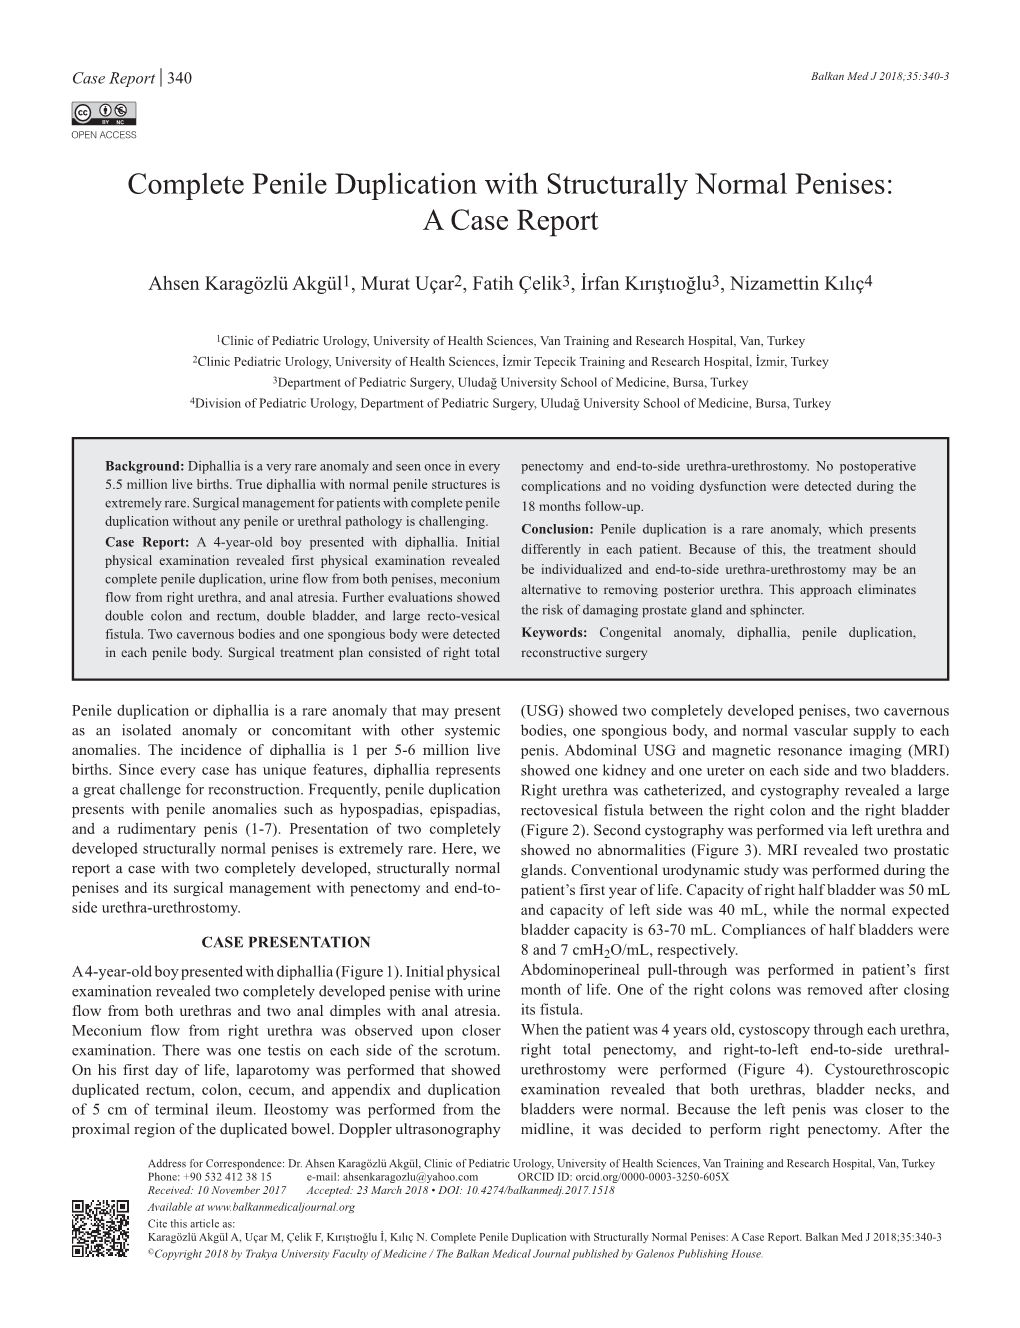 Complete Penile Duplication with Structurally Normal Penises: a Case Report